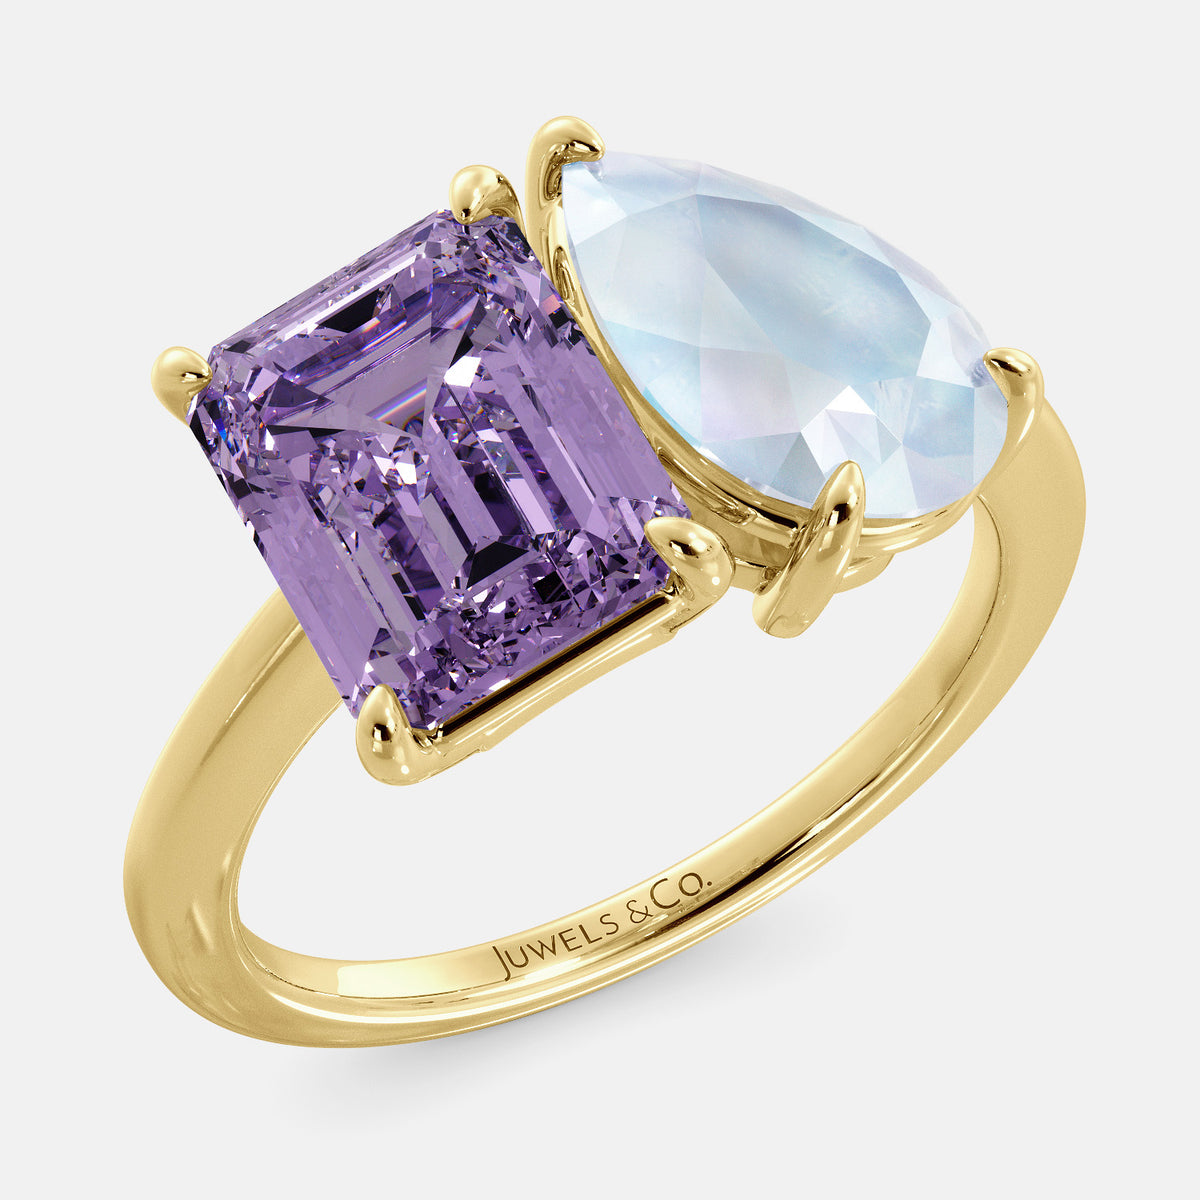 A toi et moi ring with an emerald-cut amethyst and a pear-cut gemstone. The emerald-cut morganite is set on the left of the ring, and the pear-cut gemstone is set on the right. The ring is made of recycled yellow gold and has a simple, elegant design. The pear-cut gemstone can be customized. **Here are some additional details about the image:** * The emerald-cut amethyst is a birthstone for February. * The pear-cut gemstone can be customized to any stone of your choice.